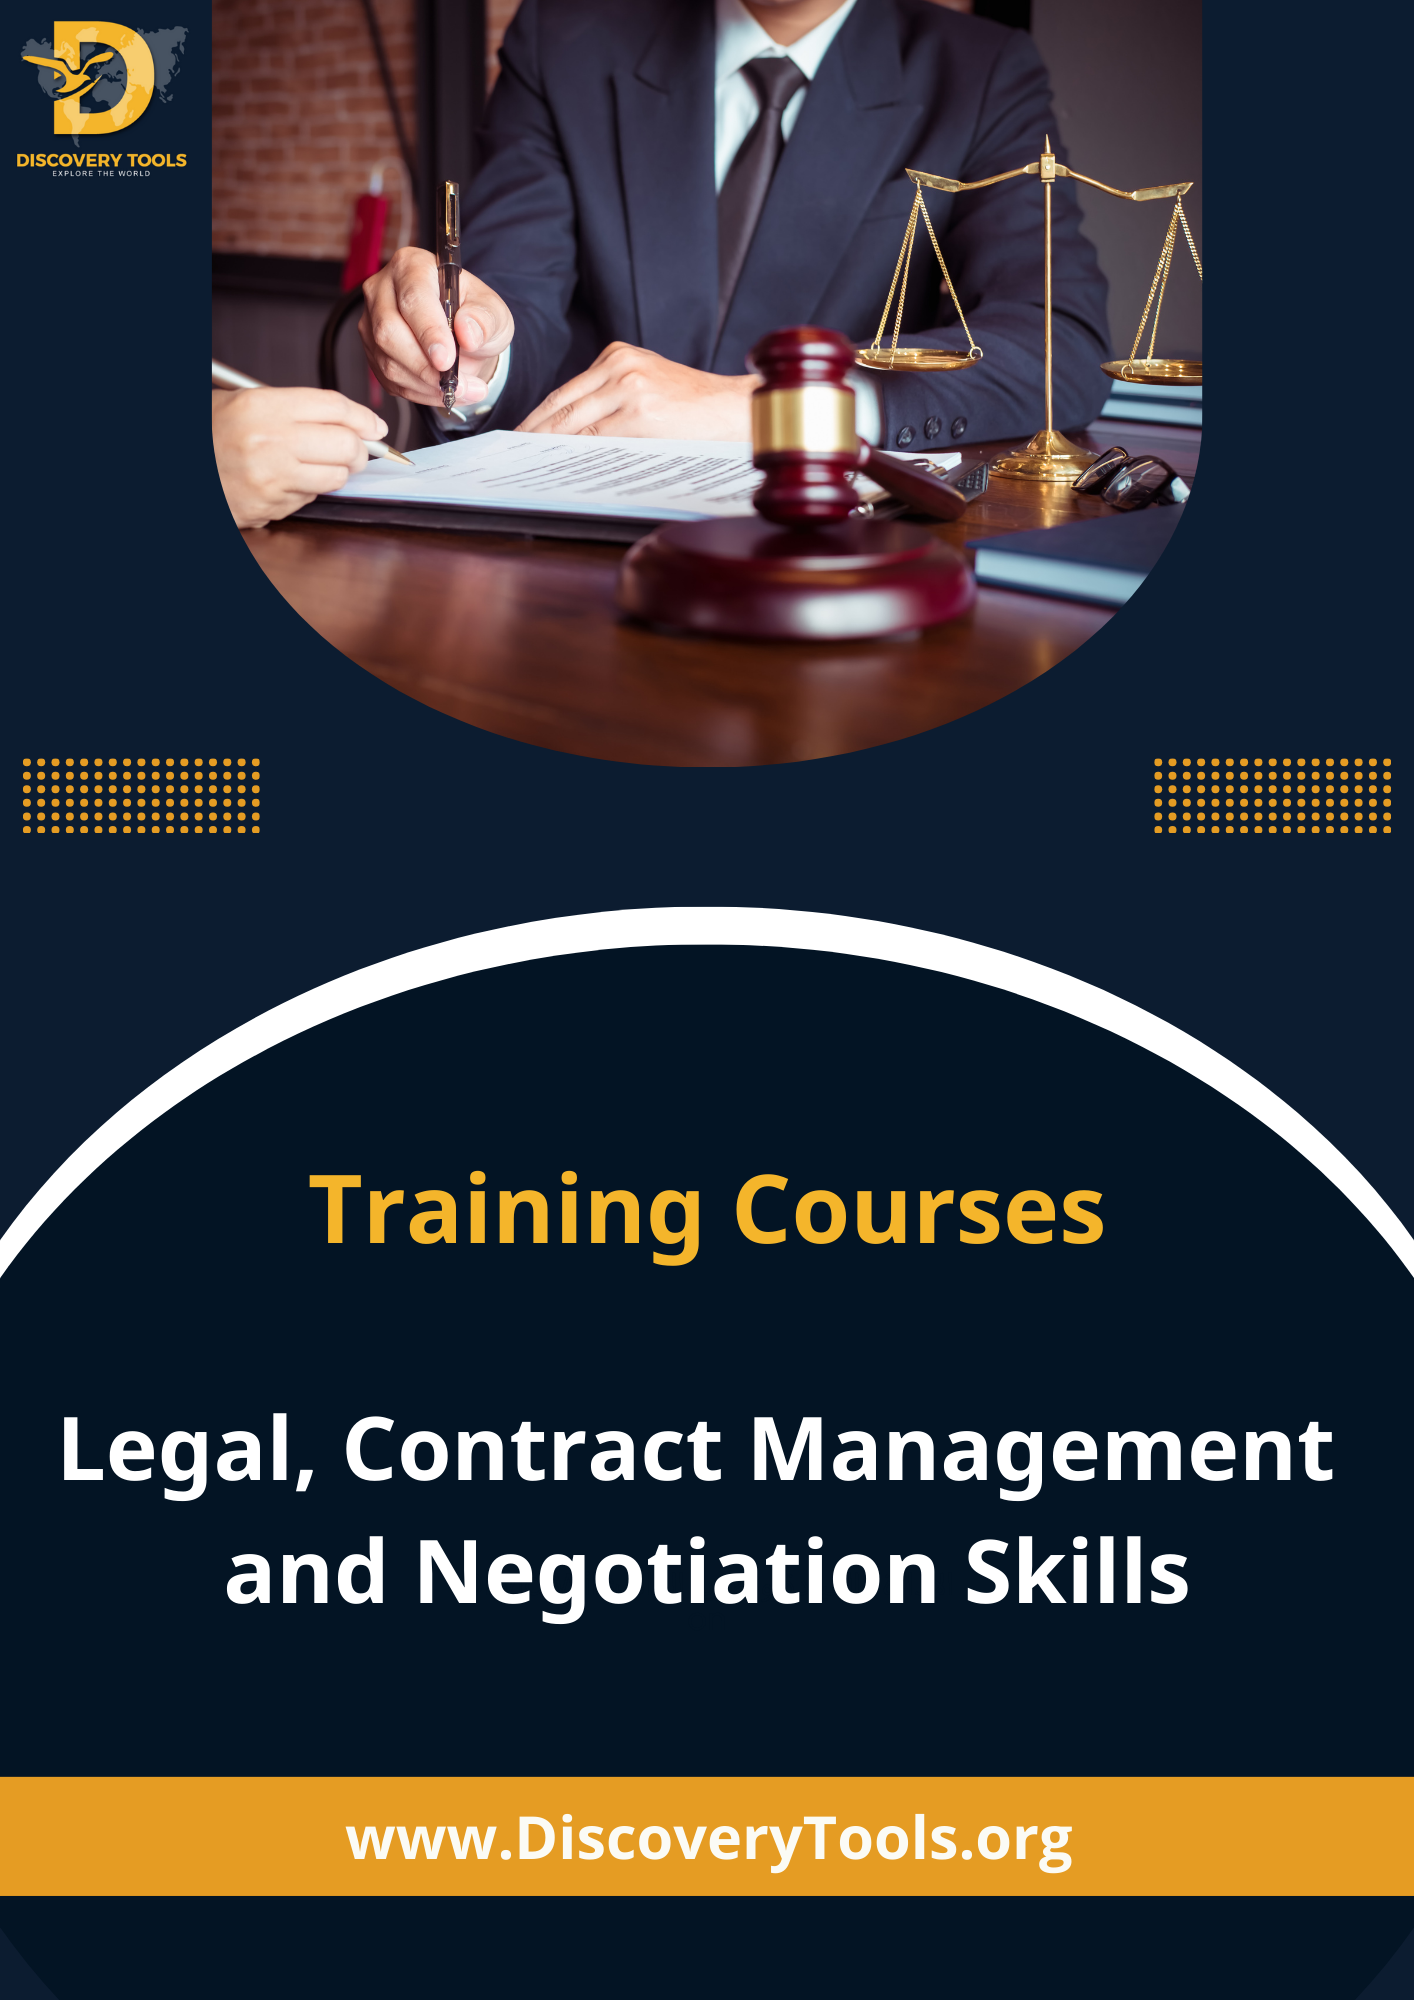 Legal, Contract Management and Negotiation Skills